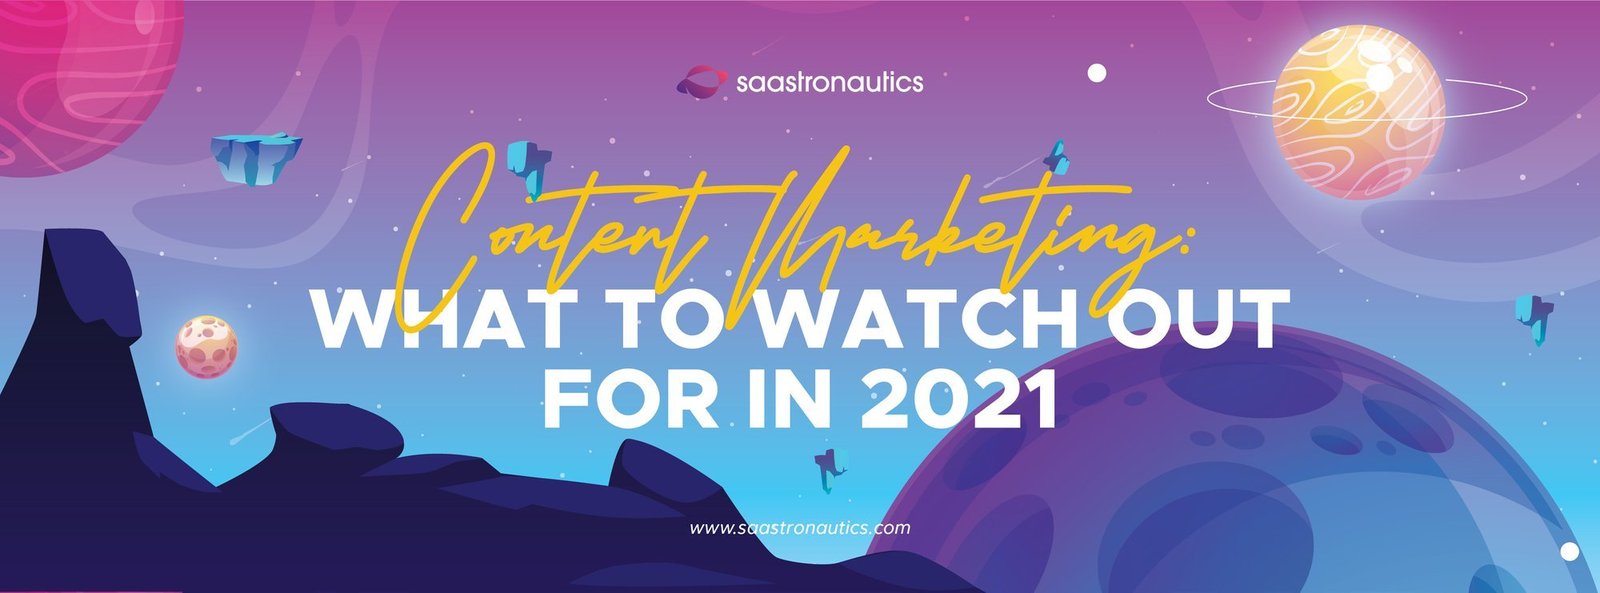 Content Marketing Predictions: What to watch out for in 2021